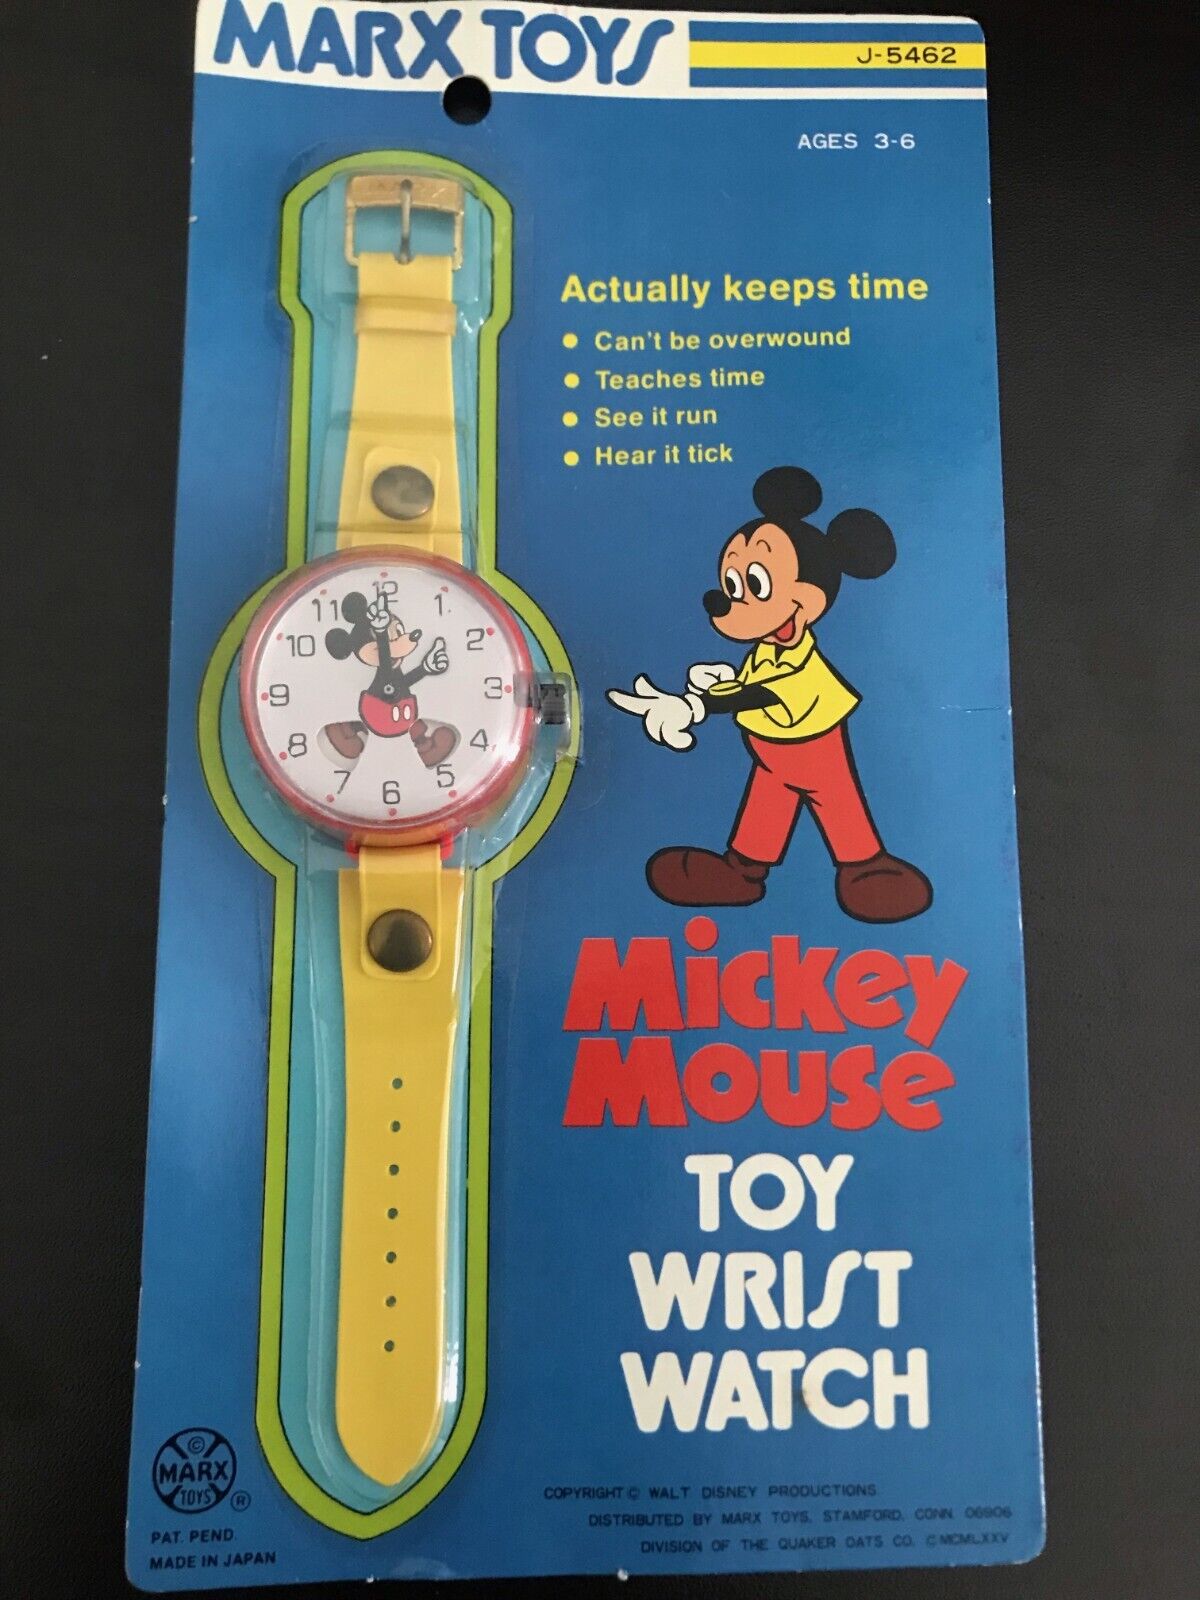 Vintage 1977 Marx Toys Mickey Mouse Toy Wrist Watch New In Box - Factory Sealed